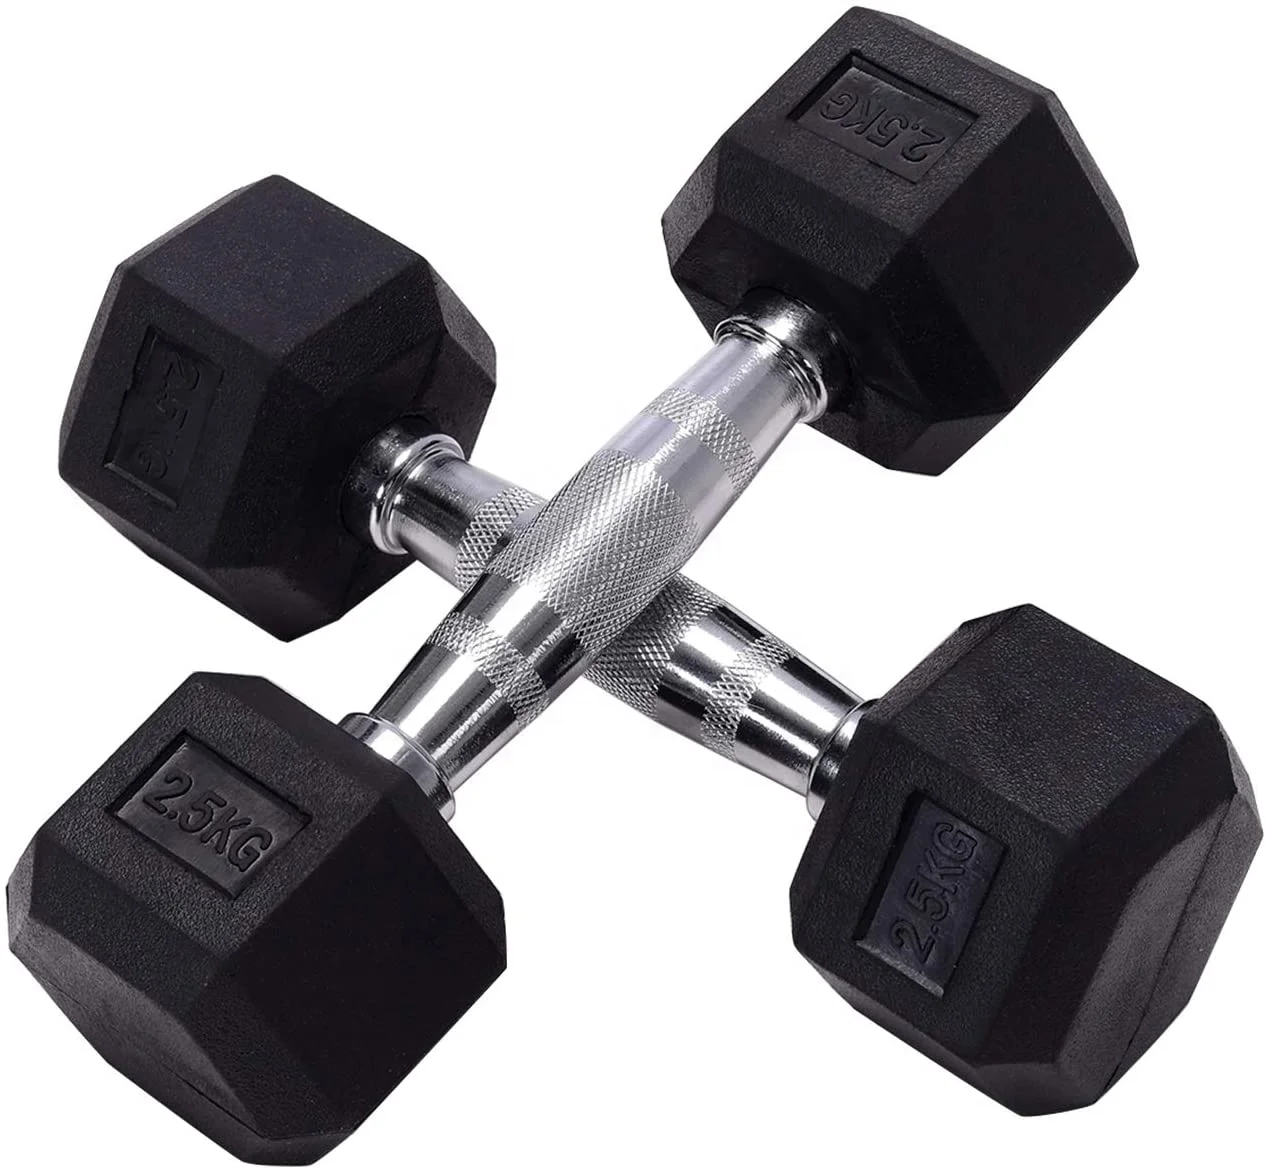 

rubber hex dumbbells gym equipment free weights adjustable dumbbell weight lifting for fitness sport weights dumbbells sets